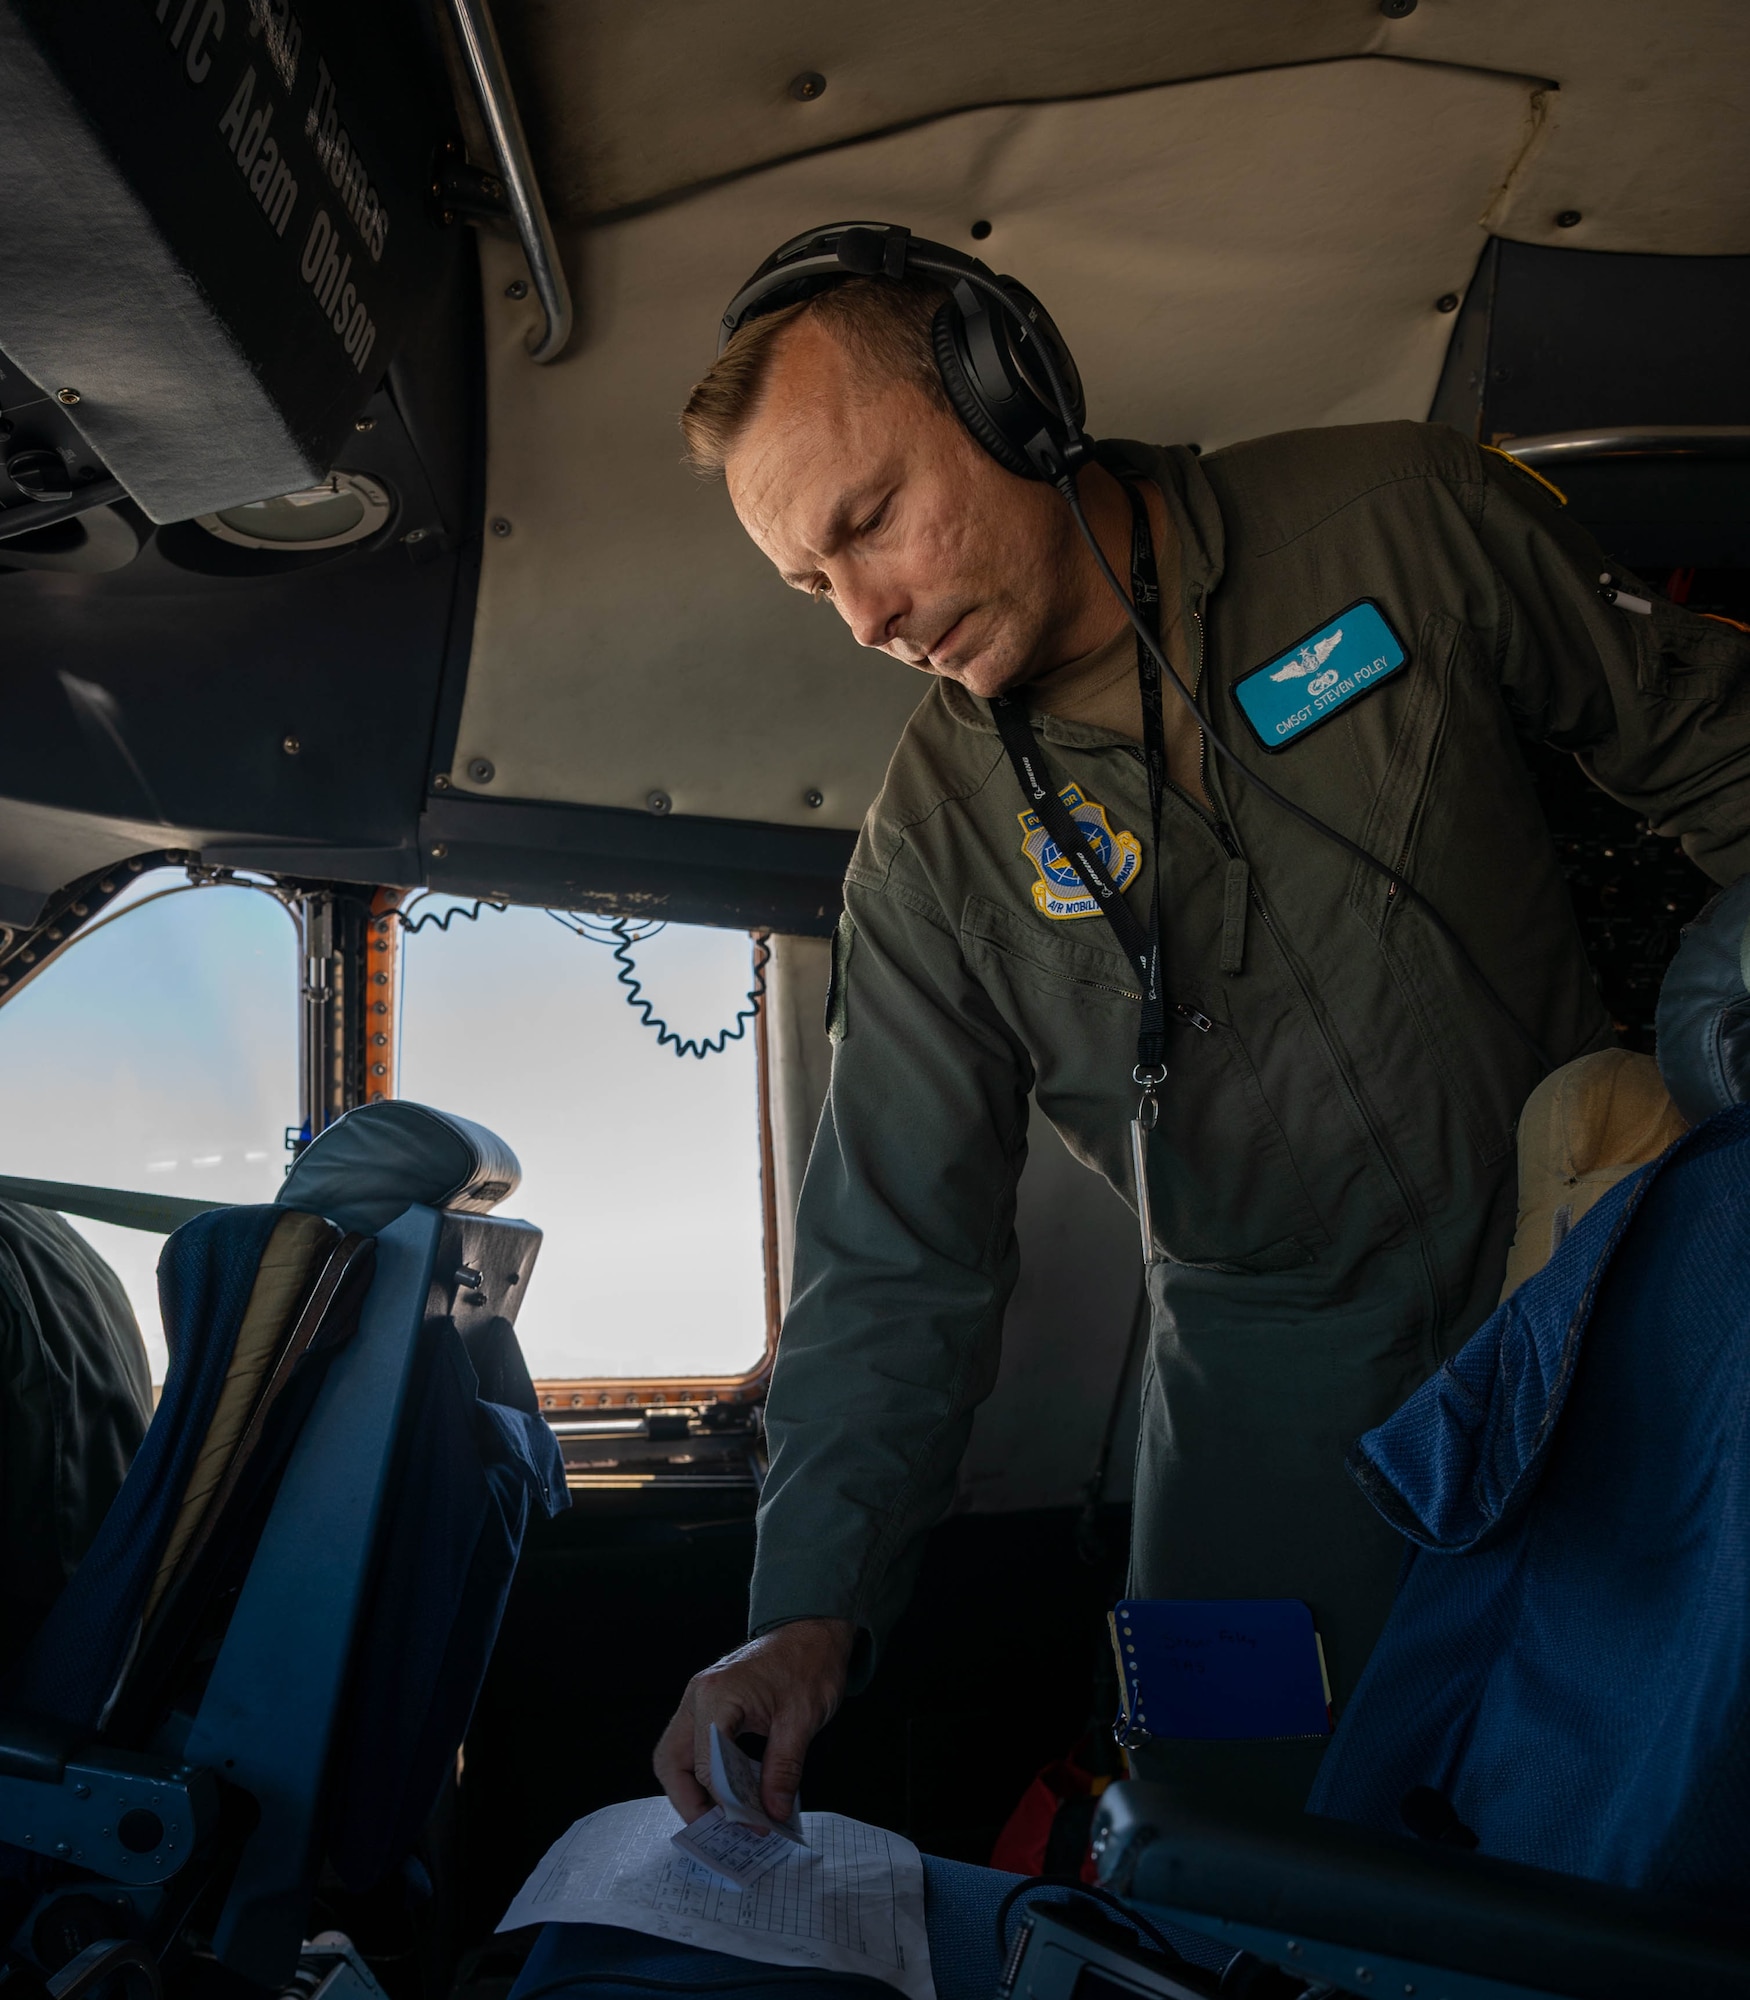 Chief Master Sgt. Steven Foley, 9th Airlift Squadron superintendent, checks flight orders during a local training flight on a C-5M Super Galaxy over New York, June 23, 2021. The 9th AS routinely trains to provide global reach with unique outsized and oversized airlift capabilities on the C-5. (U.S. Air Force photo by Senior Airman Faith Schaefer)